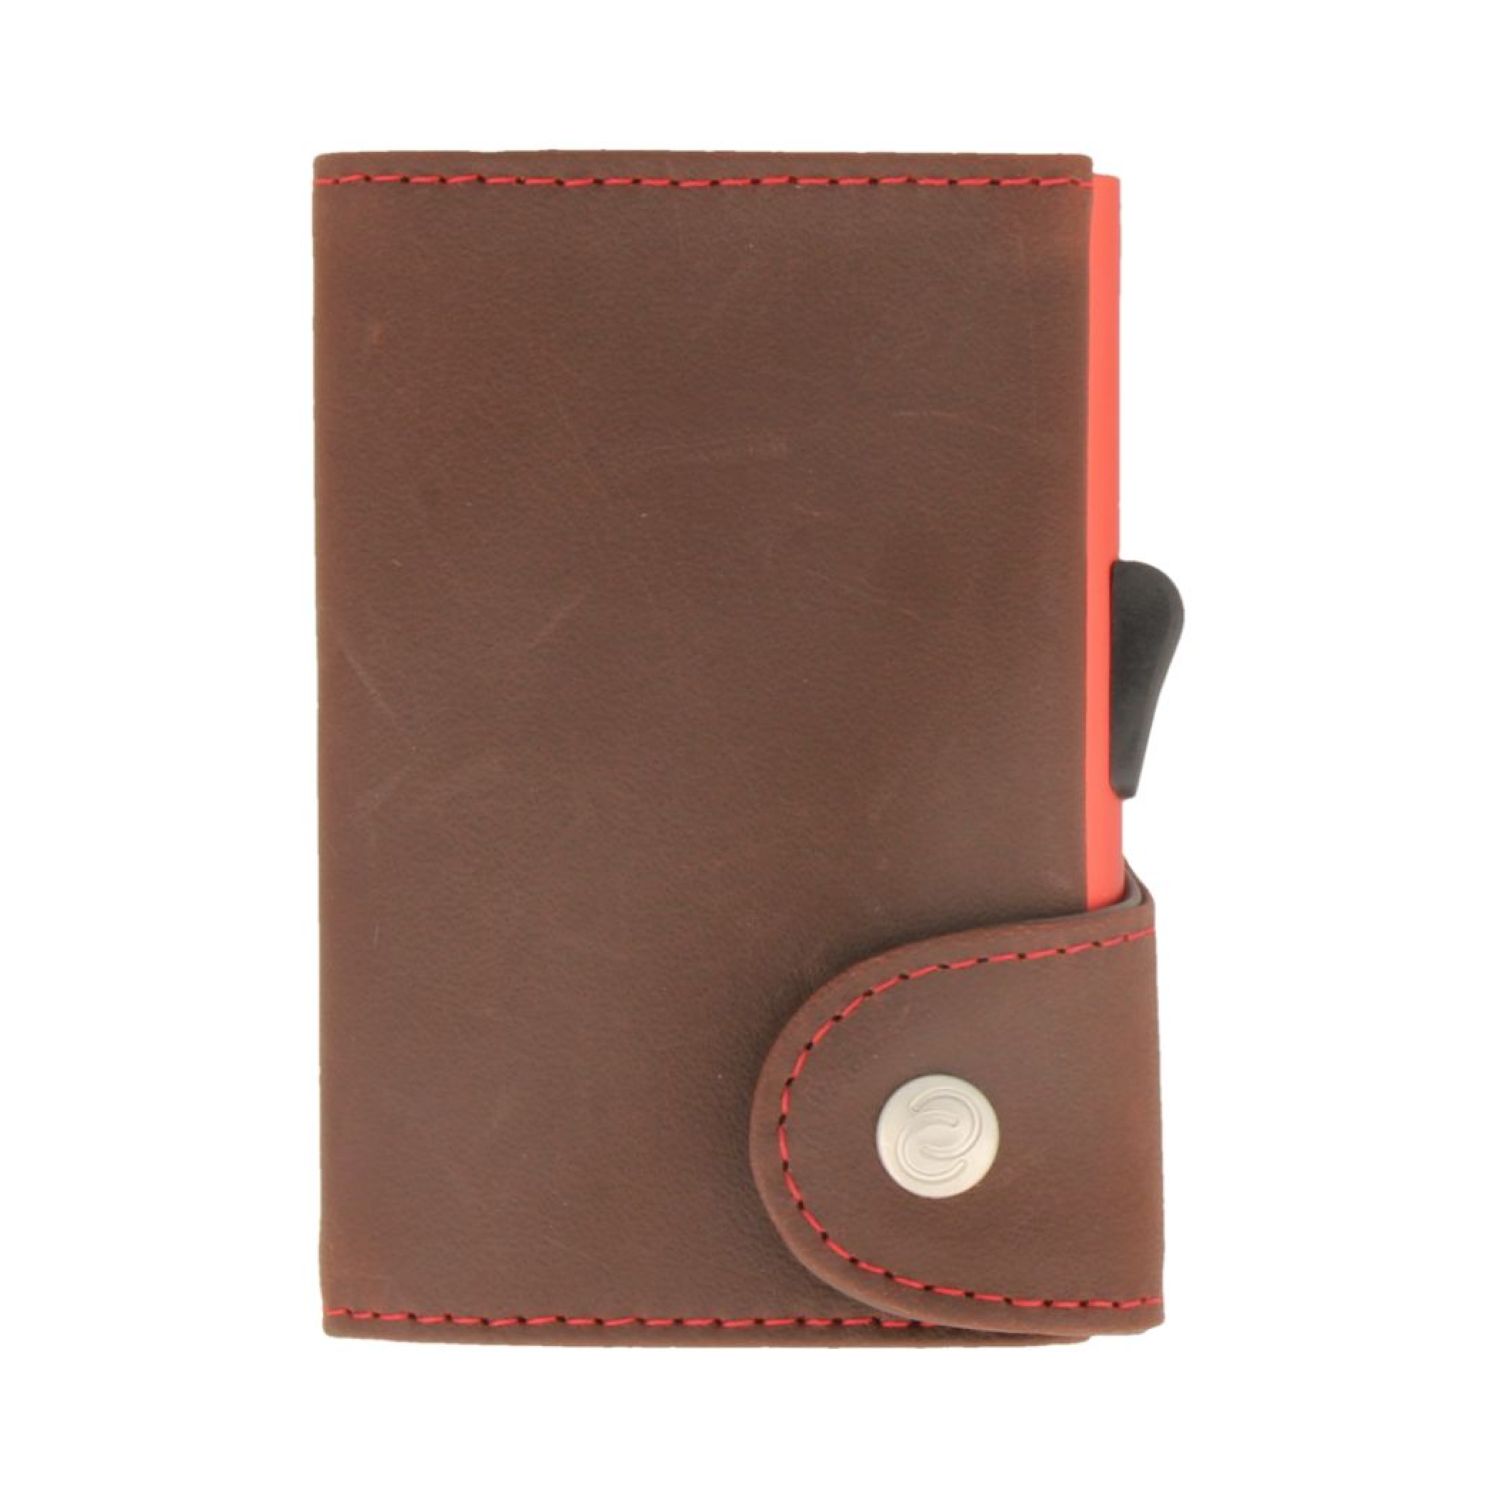 Buy C-Secure Italian Leather Wallet (Auburn) in Singapore & Malaysia - The Wallet Shop